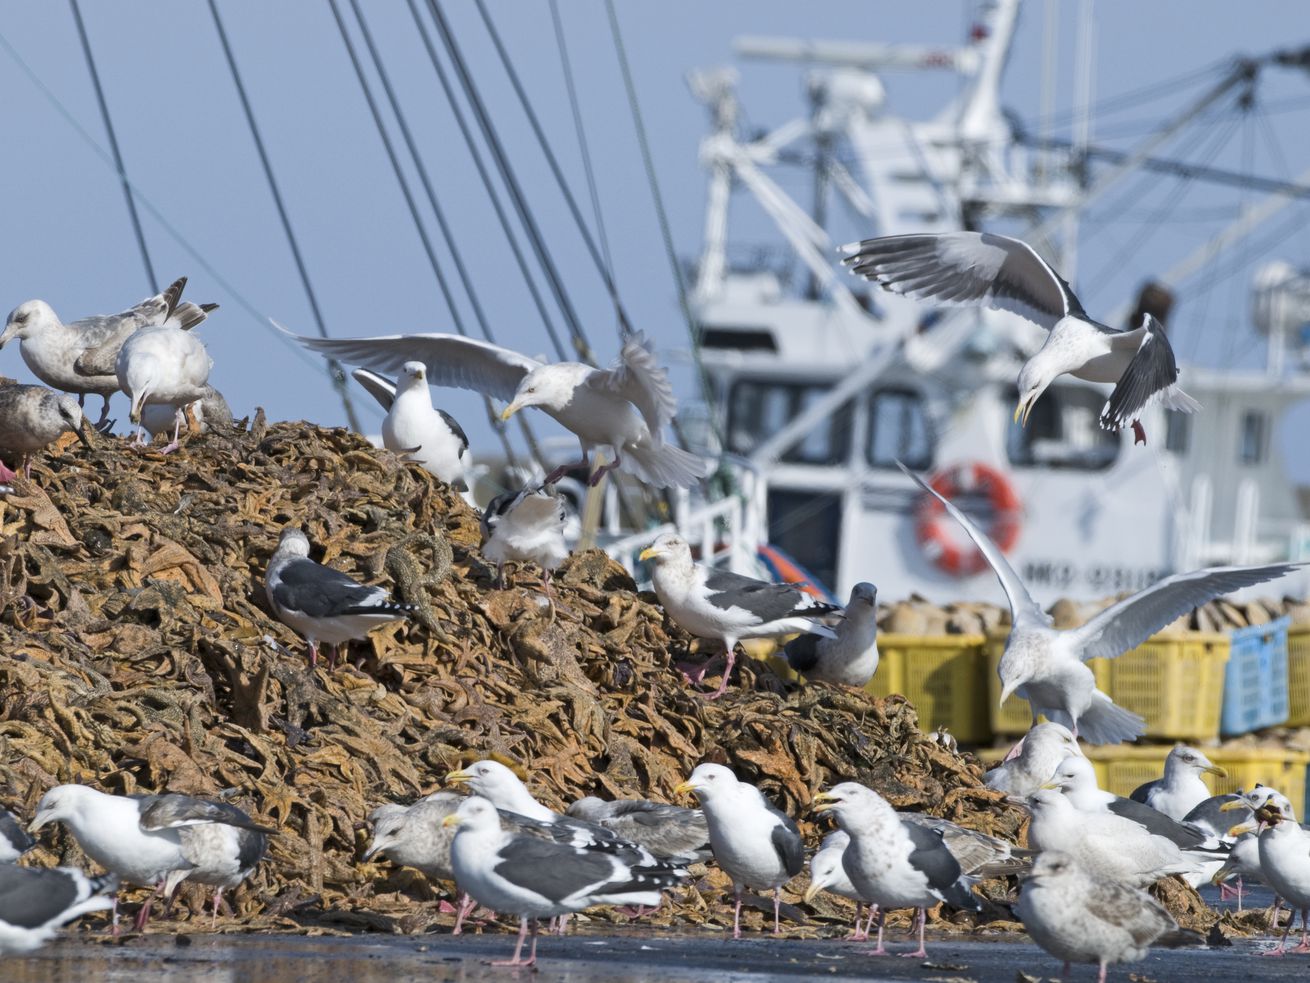 The surprise catch of seafood trawling: Massive greenhouse gas emissions